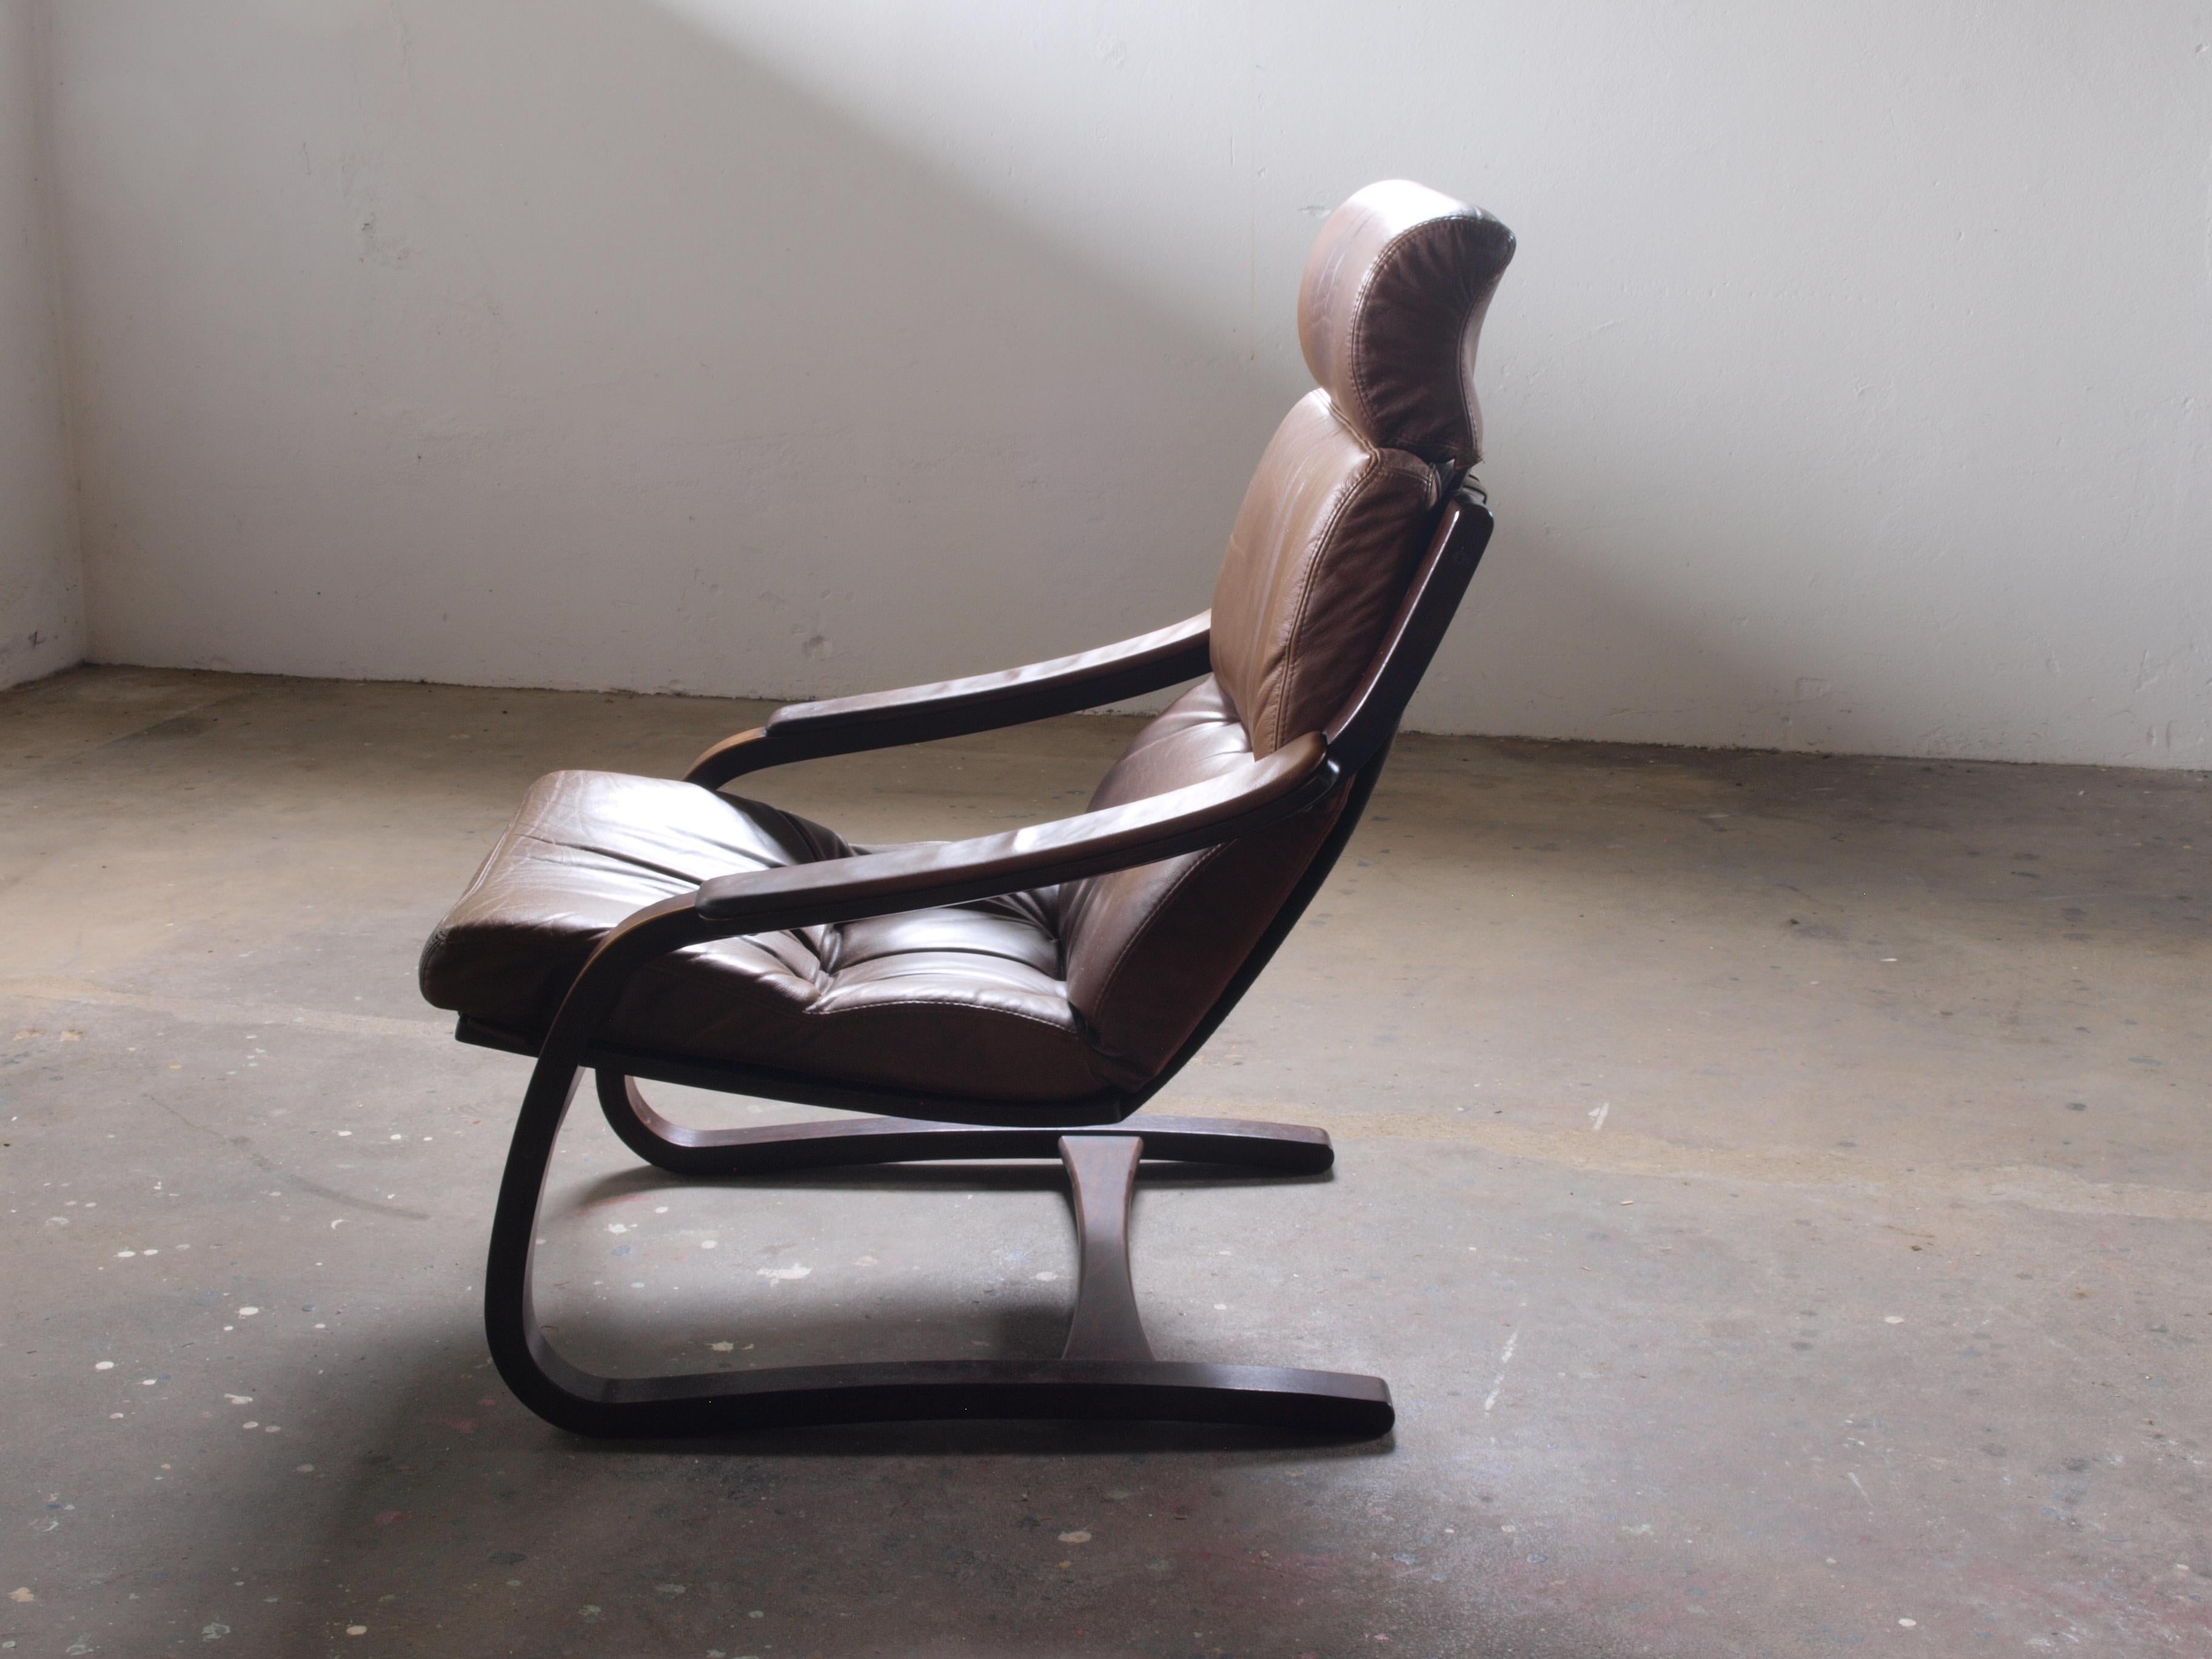 For sale, a vintage Åke Fribytter armchair by the Swedish manufacturer Nelo. This beautiful armchair is crafted from curved beech wood and upholstered in sturdy, strong and thick leather. It exudes the charm of the 1970s, offering a raw and